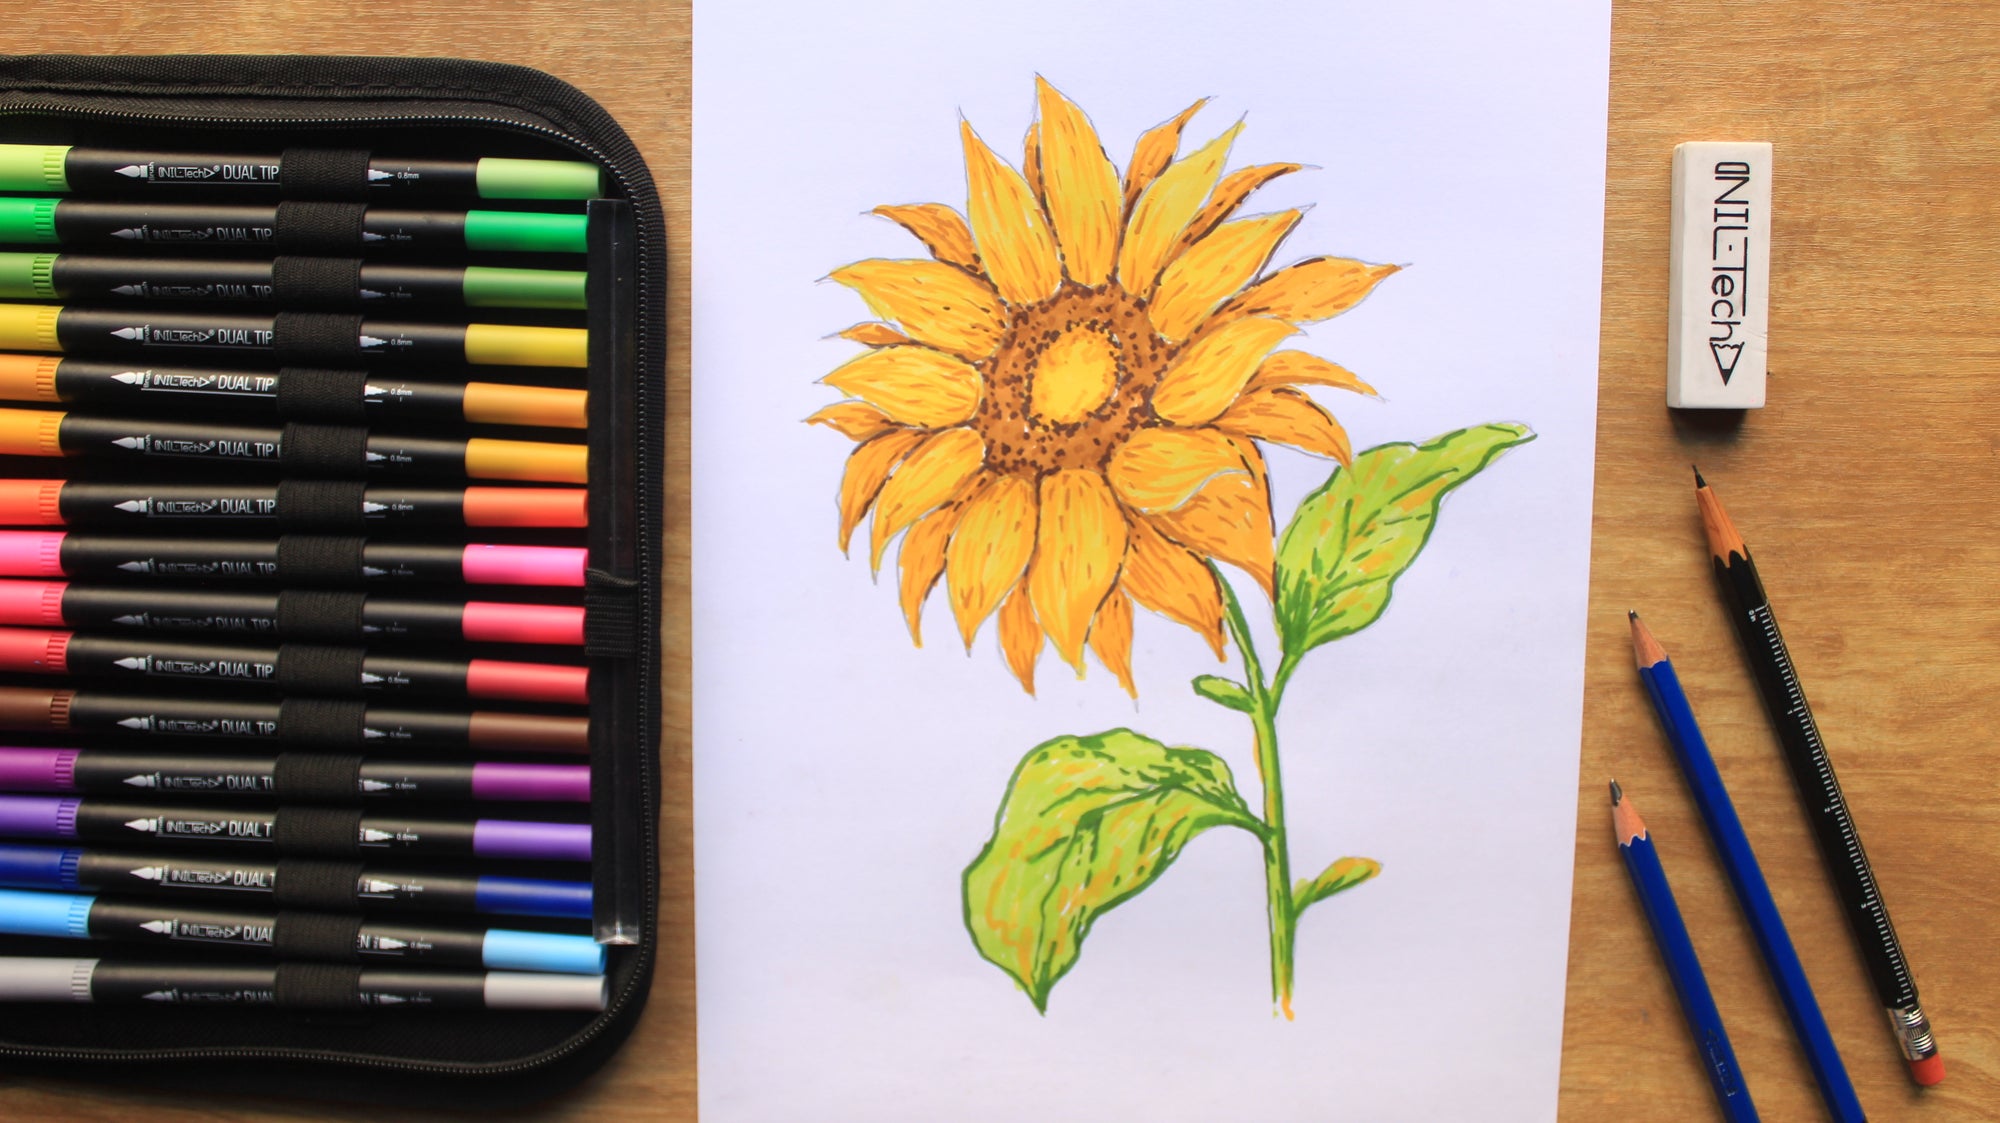 Sunflower Drawing ➤ How to draw a Sunflower